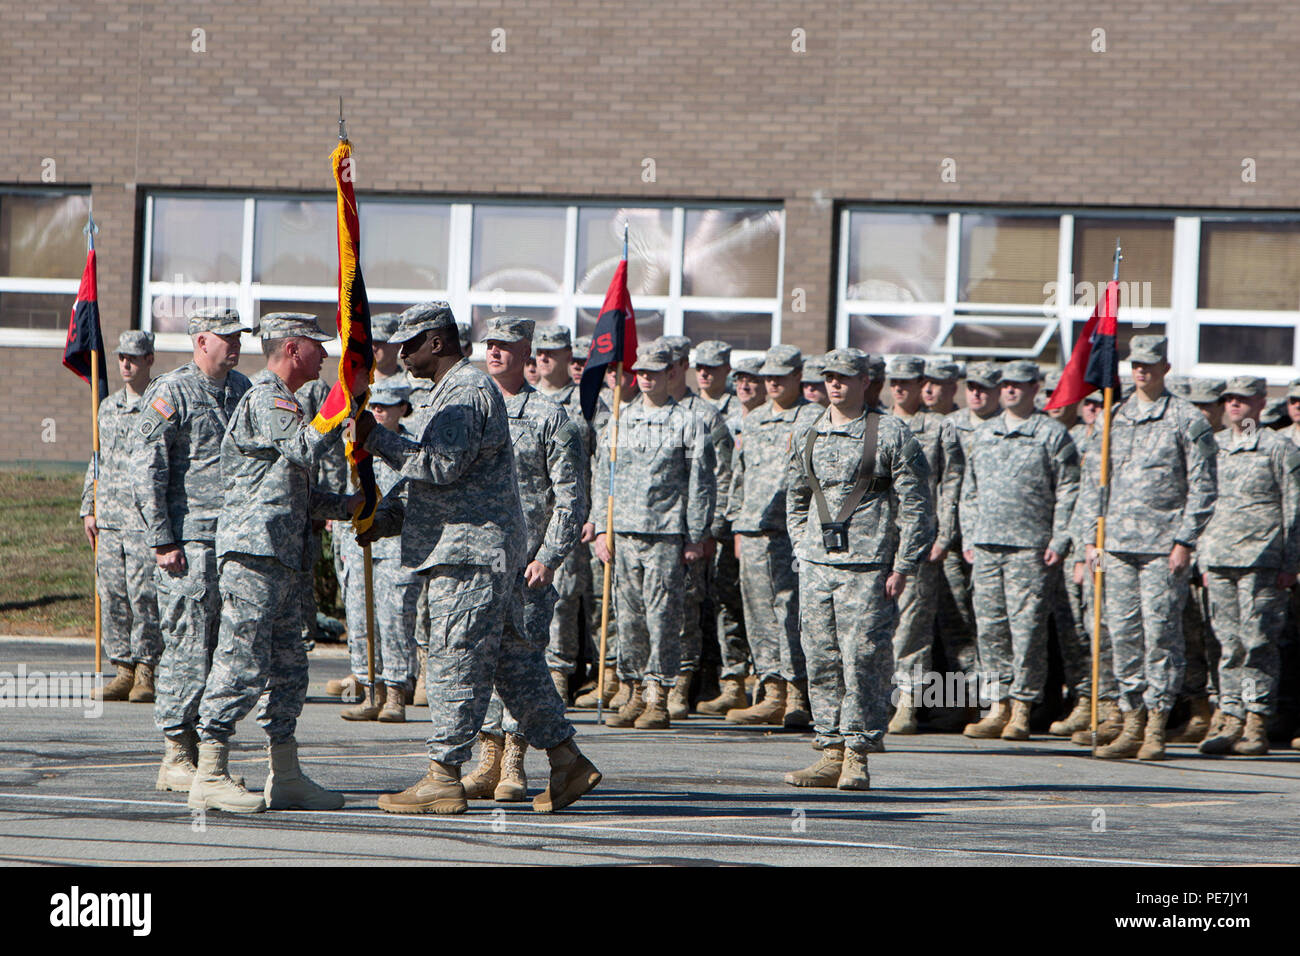 Indiana Army National Guard Lt. Col. Walter Finney passes the colors of the 38th Infantry Division Headquarters and Headquarters Battalion to Maj. Gen. David C. Wood, the 38th ID commanding general, during the battalion’s command change ceremony, Saturday, Oct. 17, 2015. (Photo by Sgt. 1st Class Gary Nelson) Stock Photo